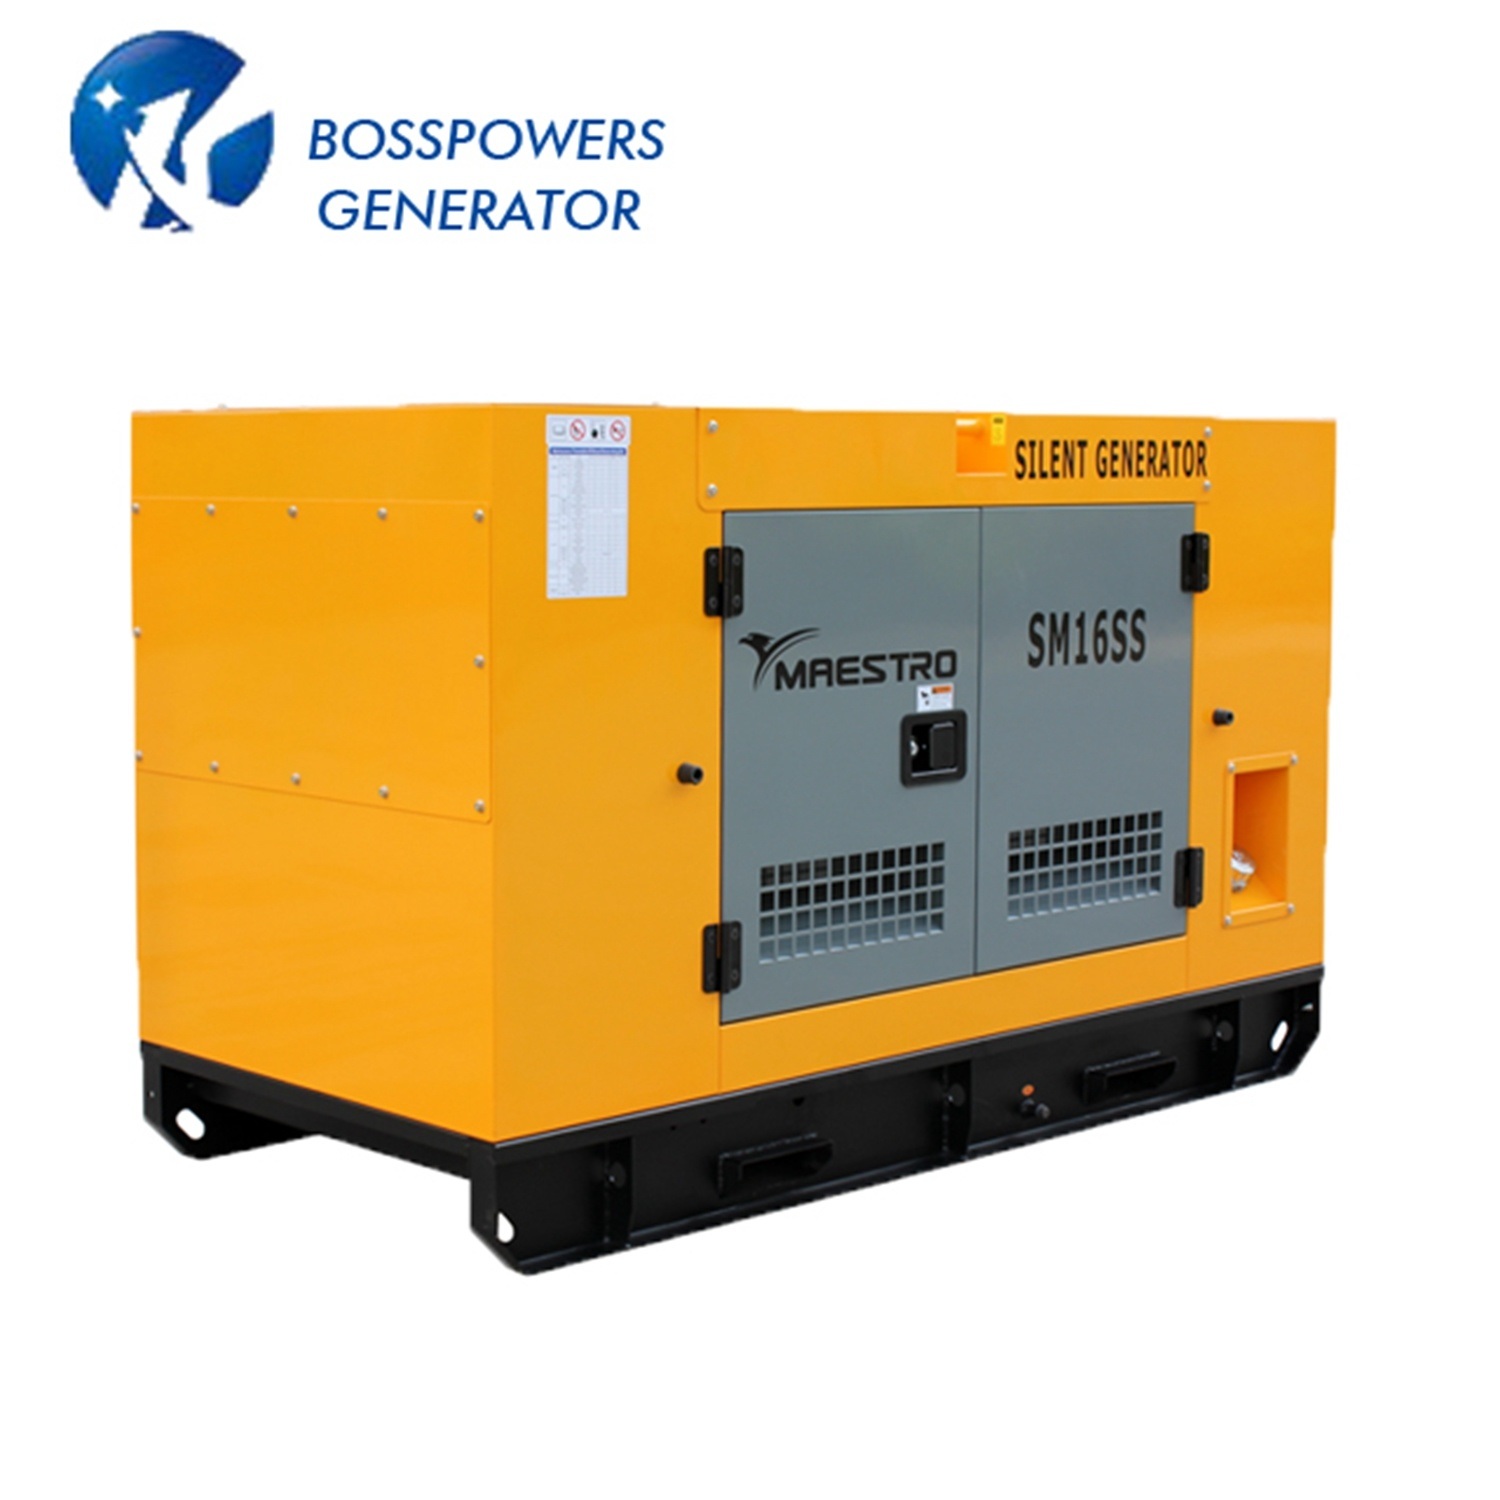 Prime Power 120kw 150kVA Diesel Generator Powered by 1106A-70tag2 Filter